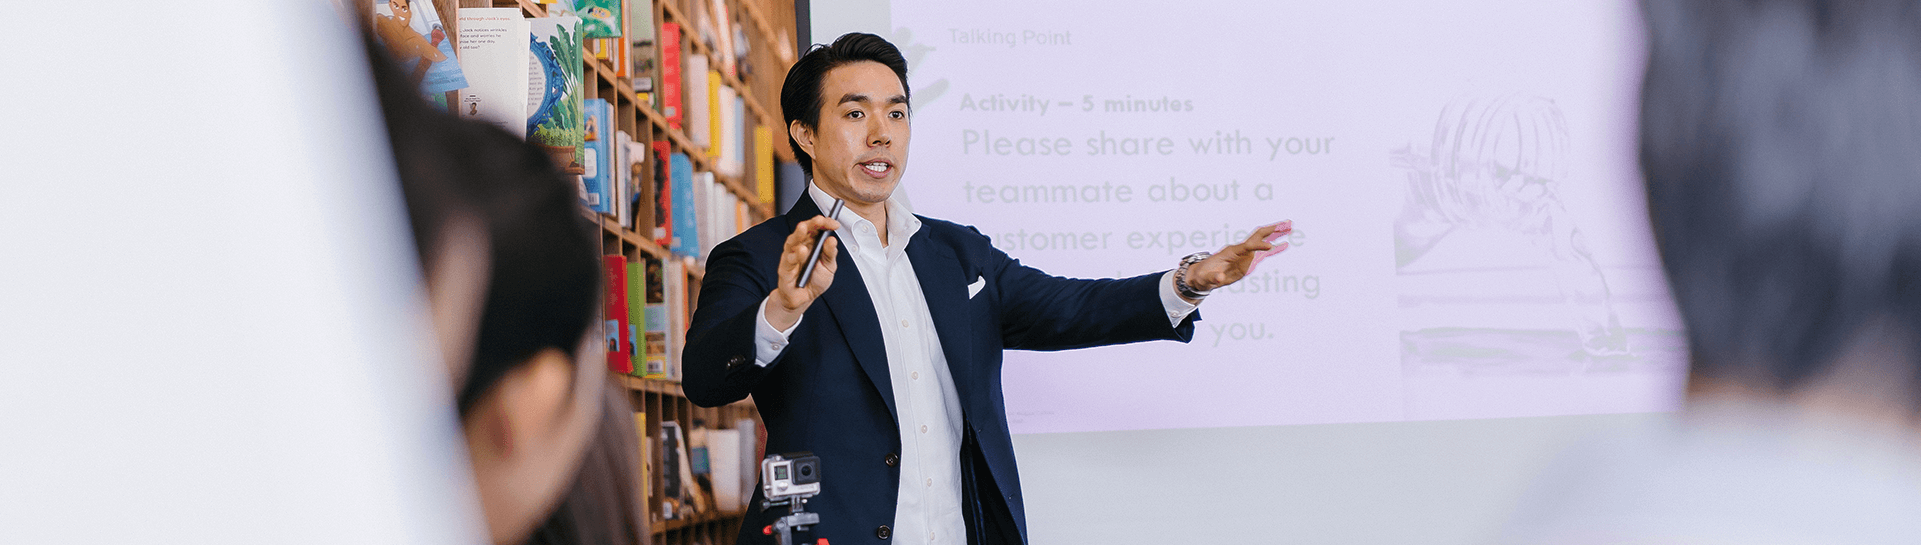 A man in a suit giving a lecture